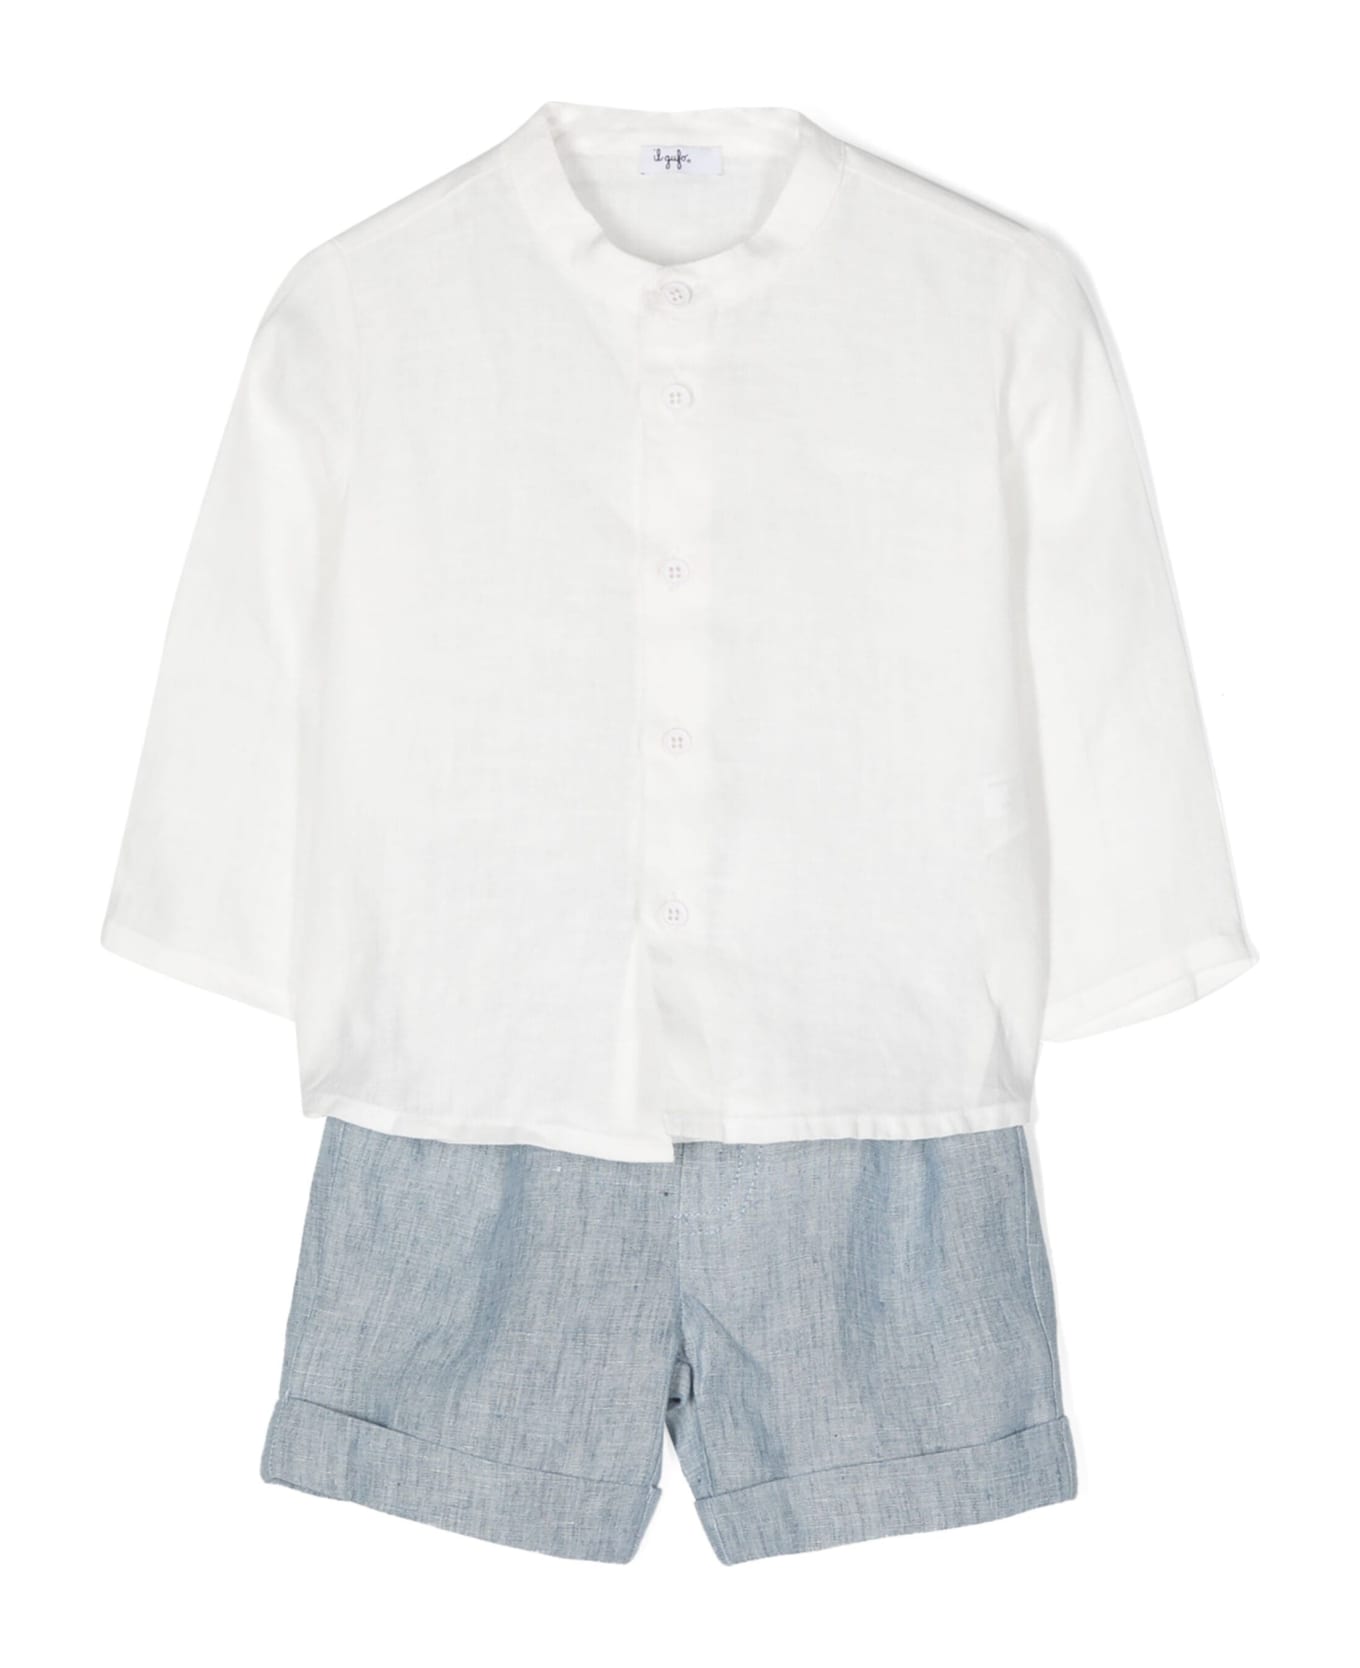 Il Gufo Light Blue And White Linen Two Piece Set - White ボトムス